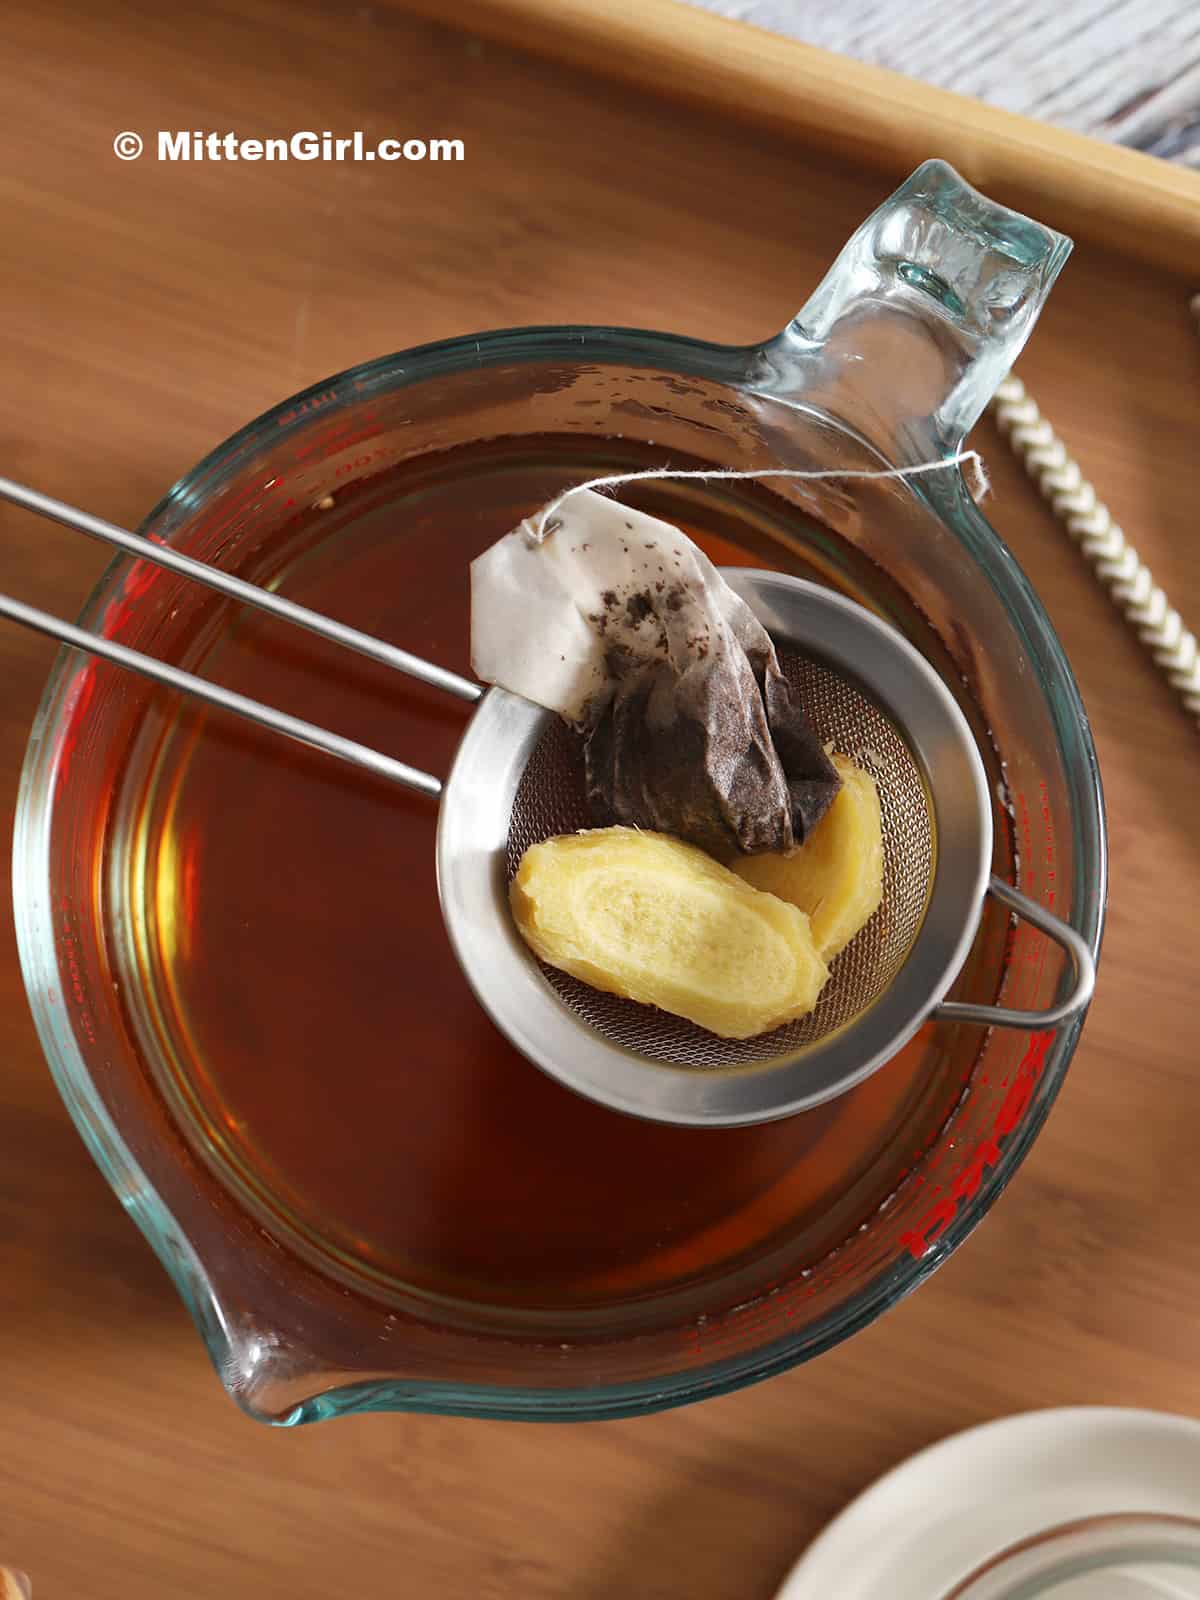 A mesh strainer holding ginger root and a tea bag.